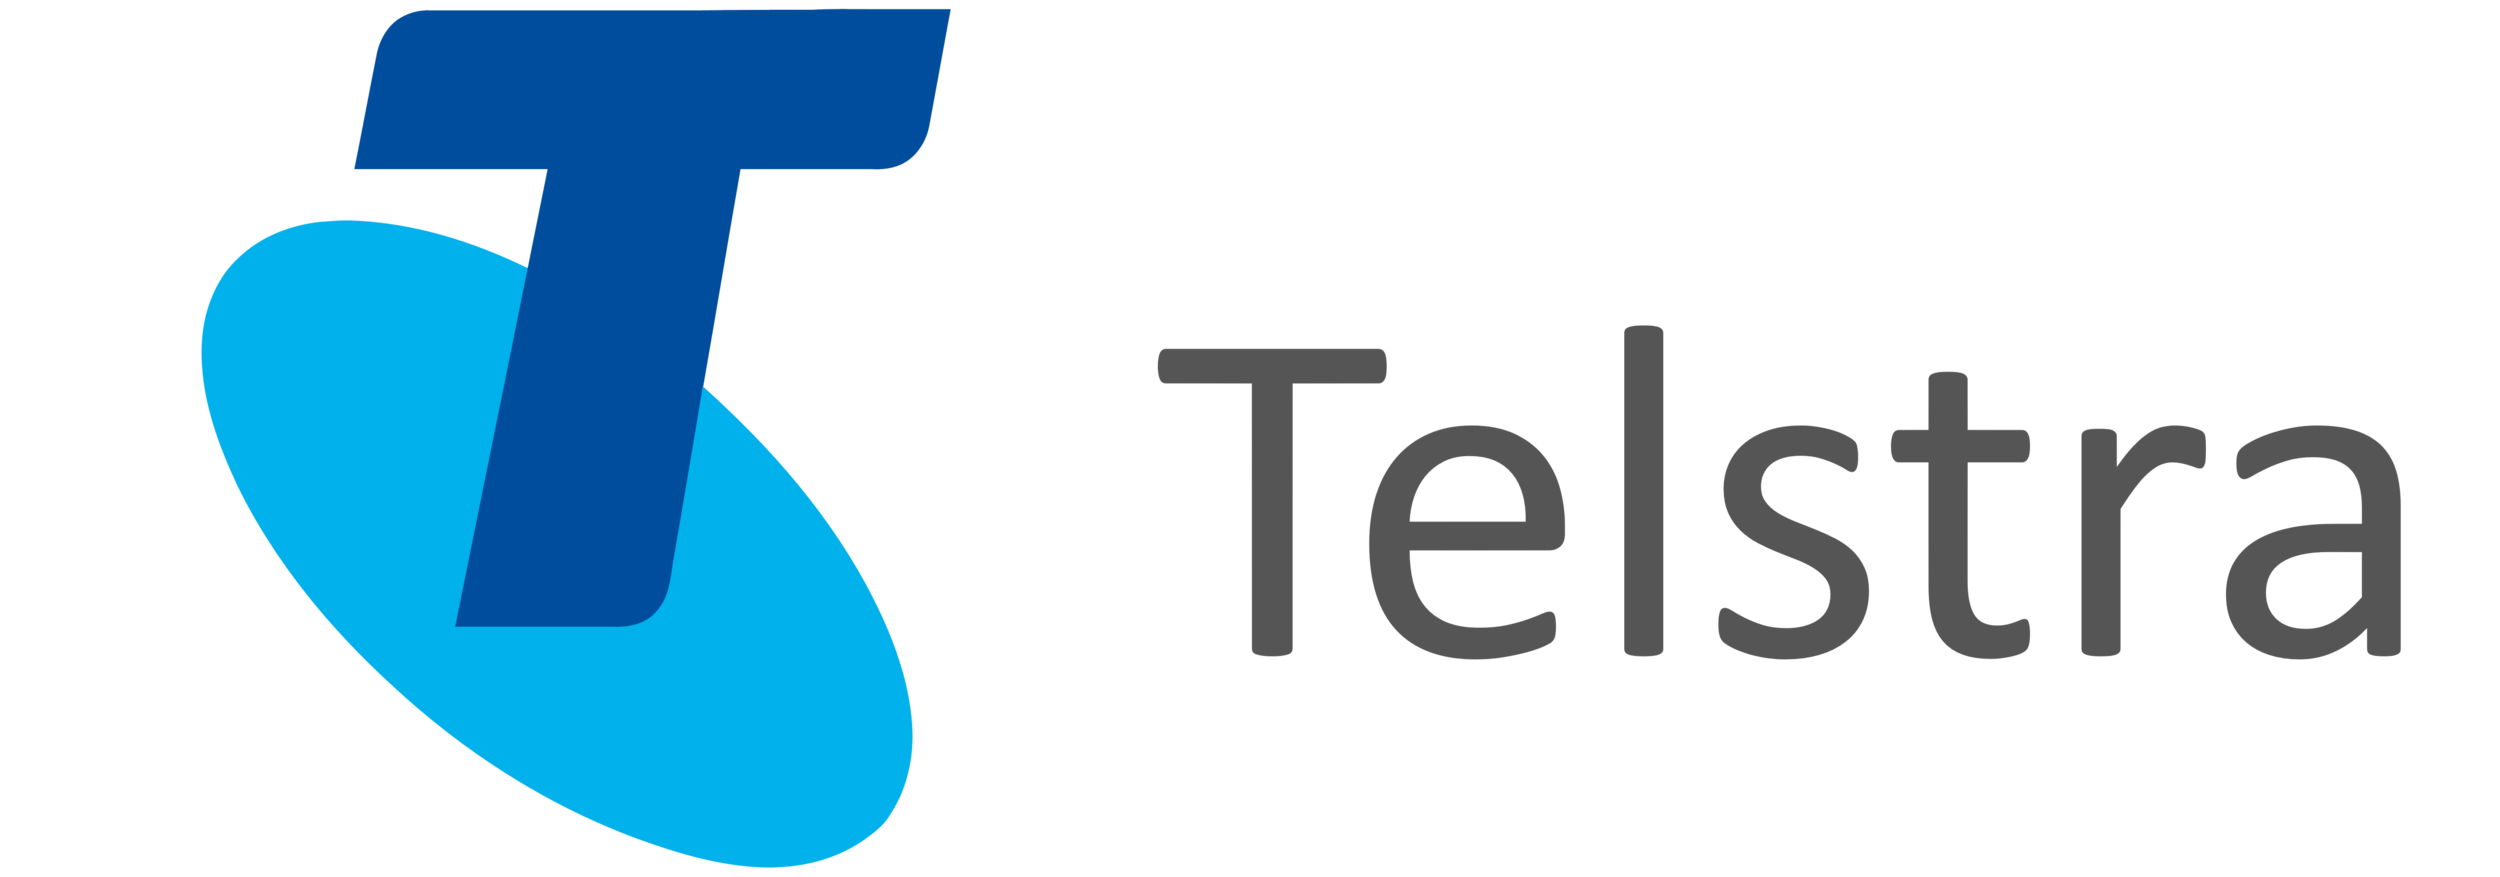 new-Telstra-logo-png-latest.png